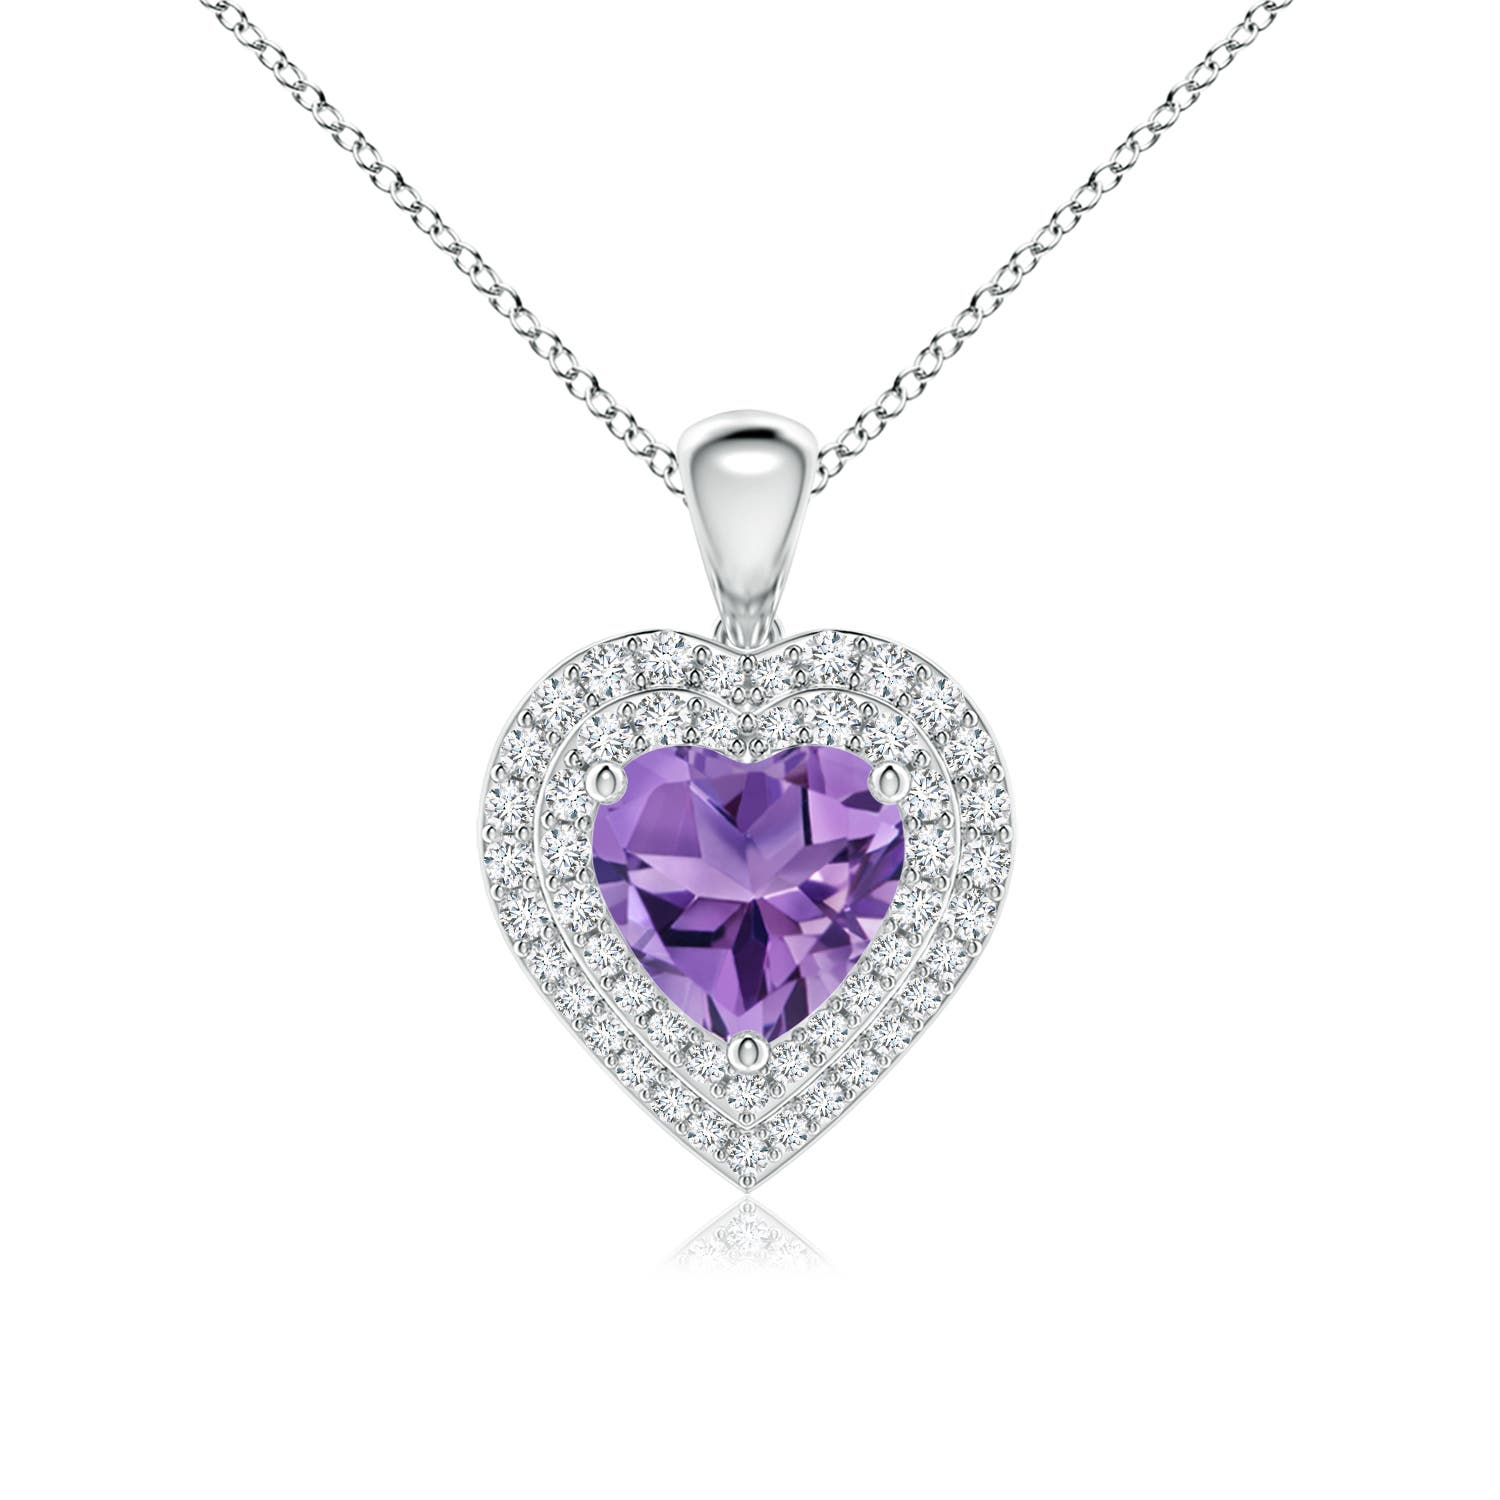 AA - Amethyst / 1.53 CT / 14 KT White Gold